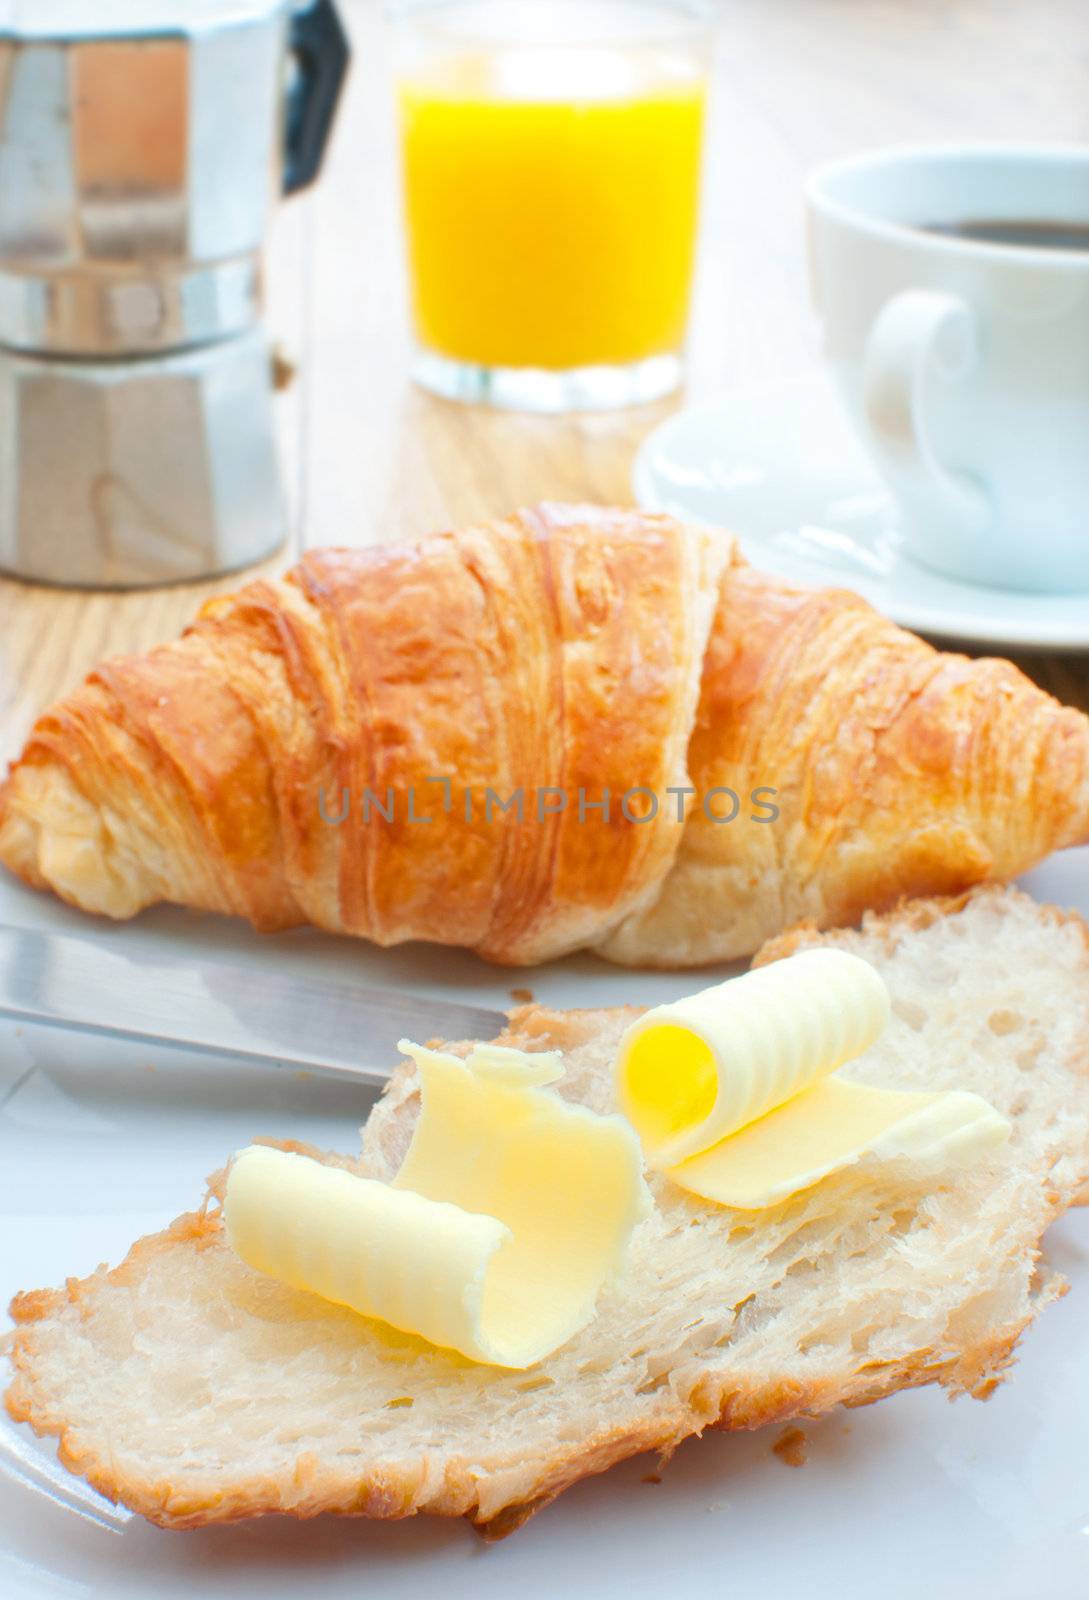 Croissant with butter, coffee and orange juice